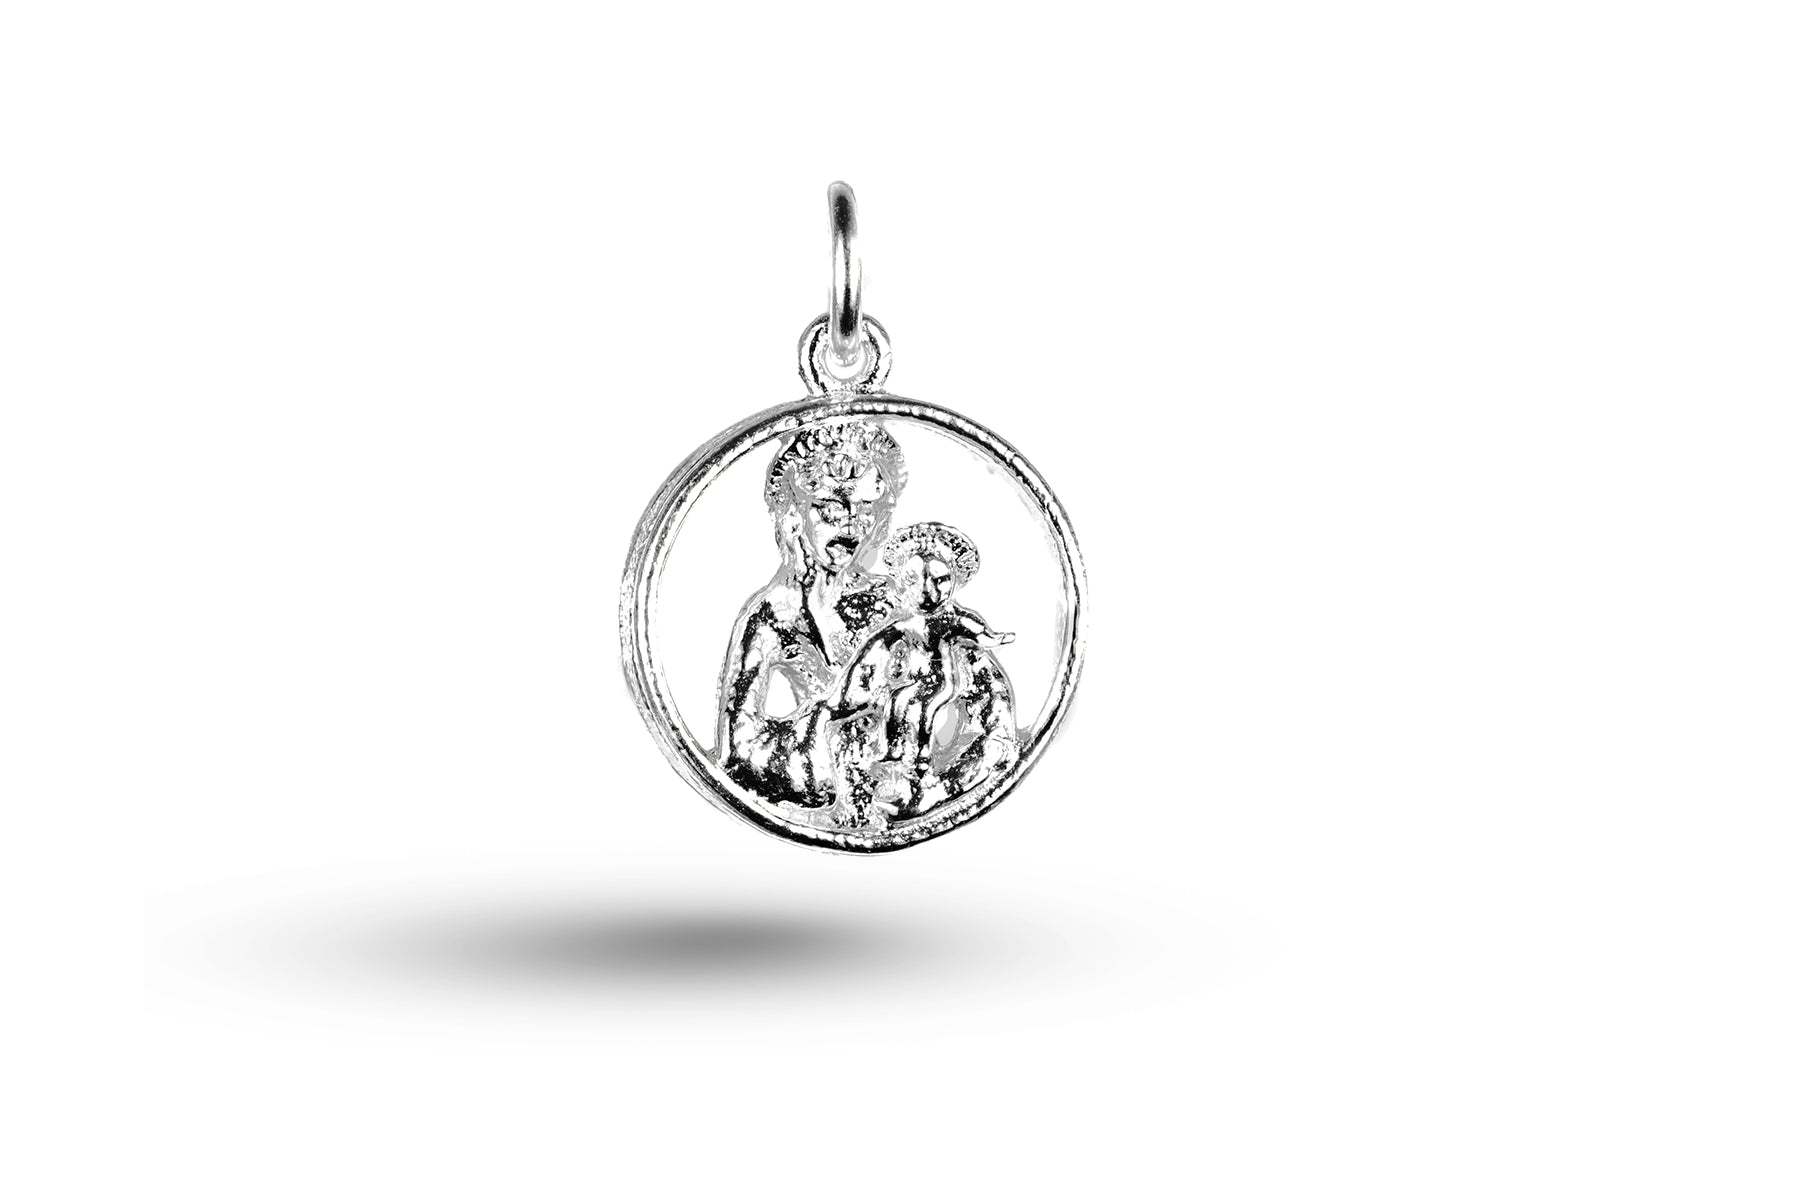 White gold Madonna and Child in Surround charm.